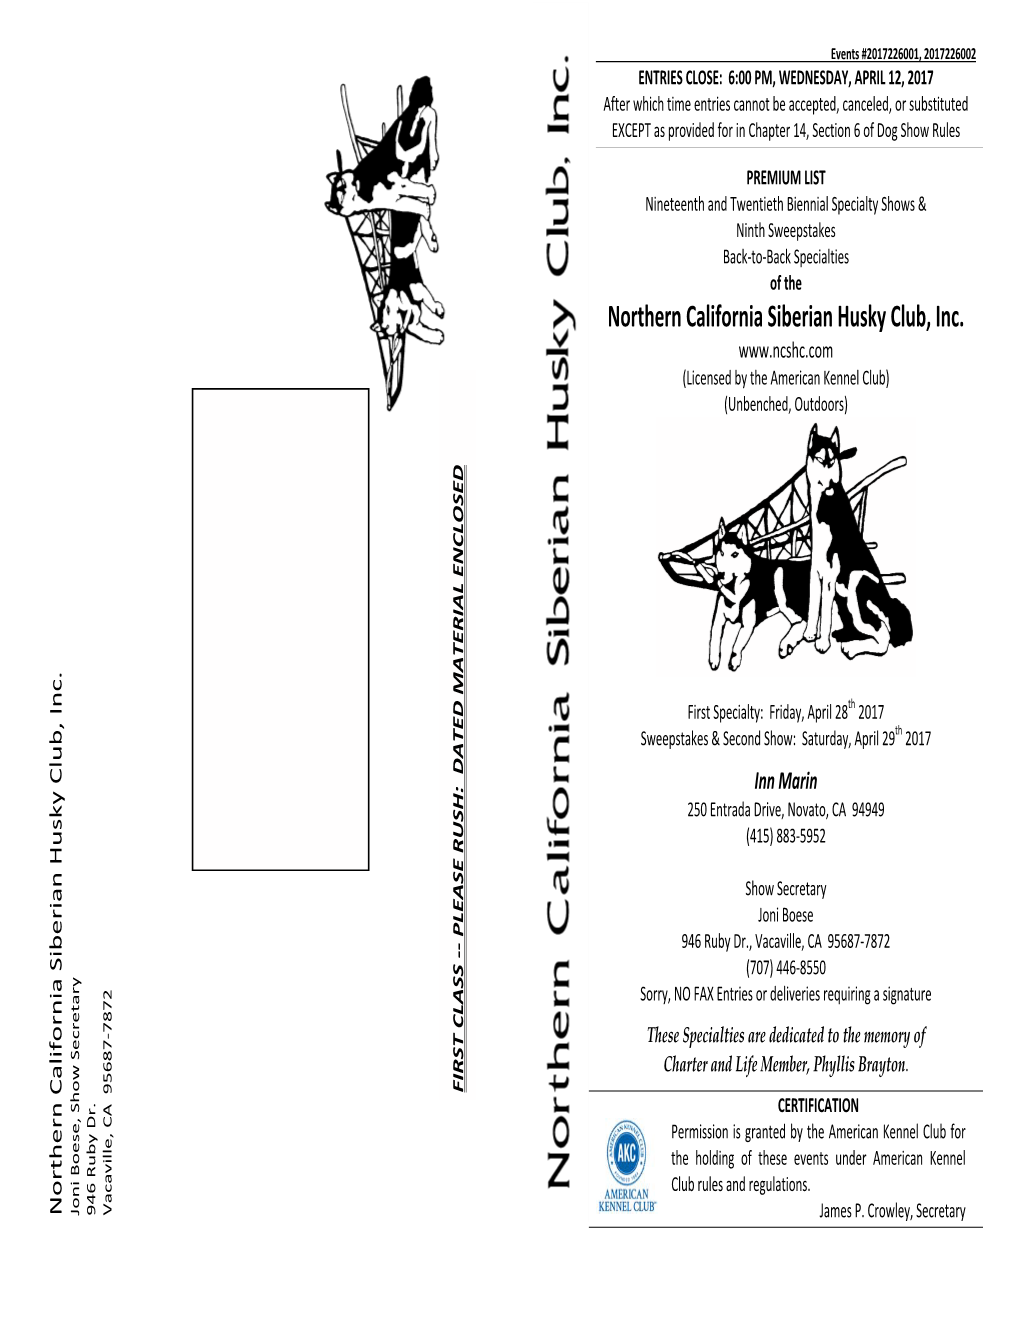 Northern California Siberian Husky Club, Inc. (Licensed by the American Kennel Club) (Unbenched, Outdoors)